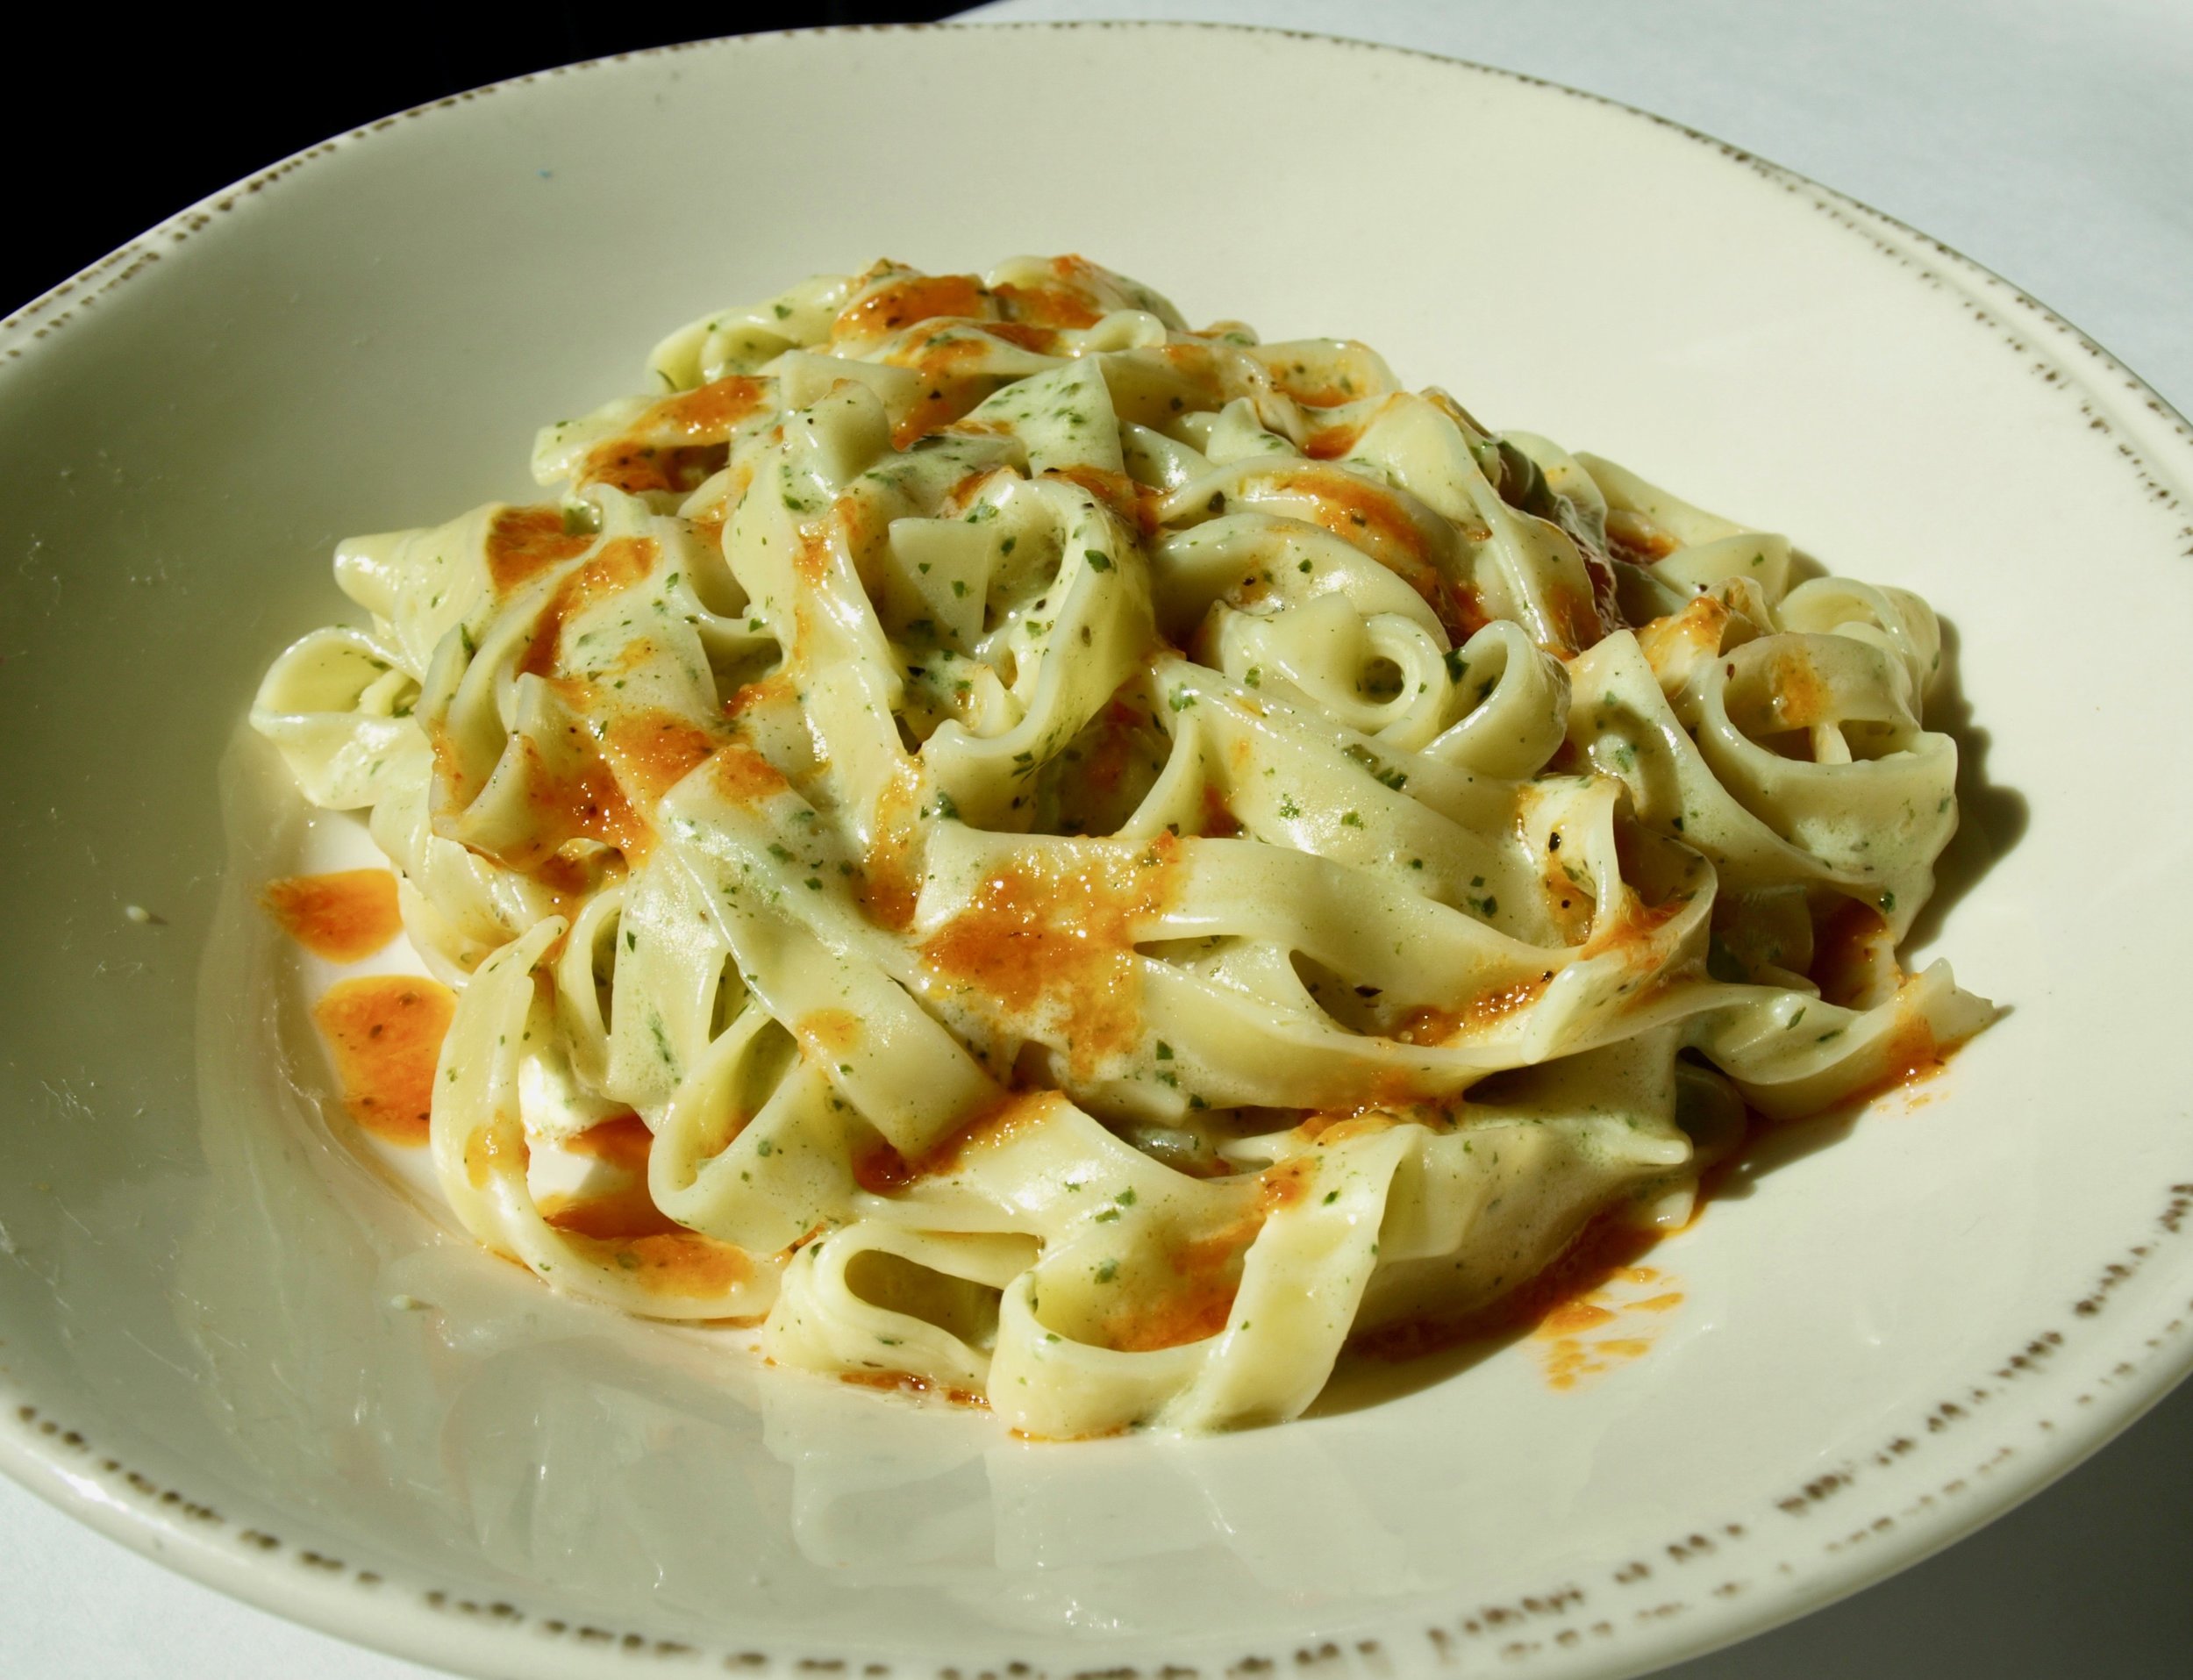   Tagliatelle pasta with roasted pepper and pesto sauce   